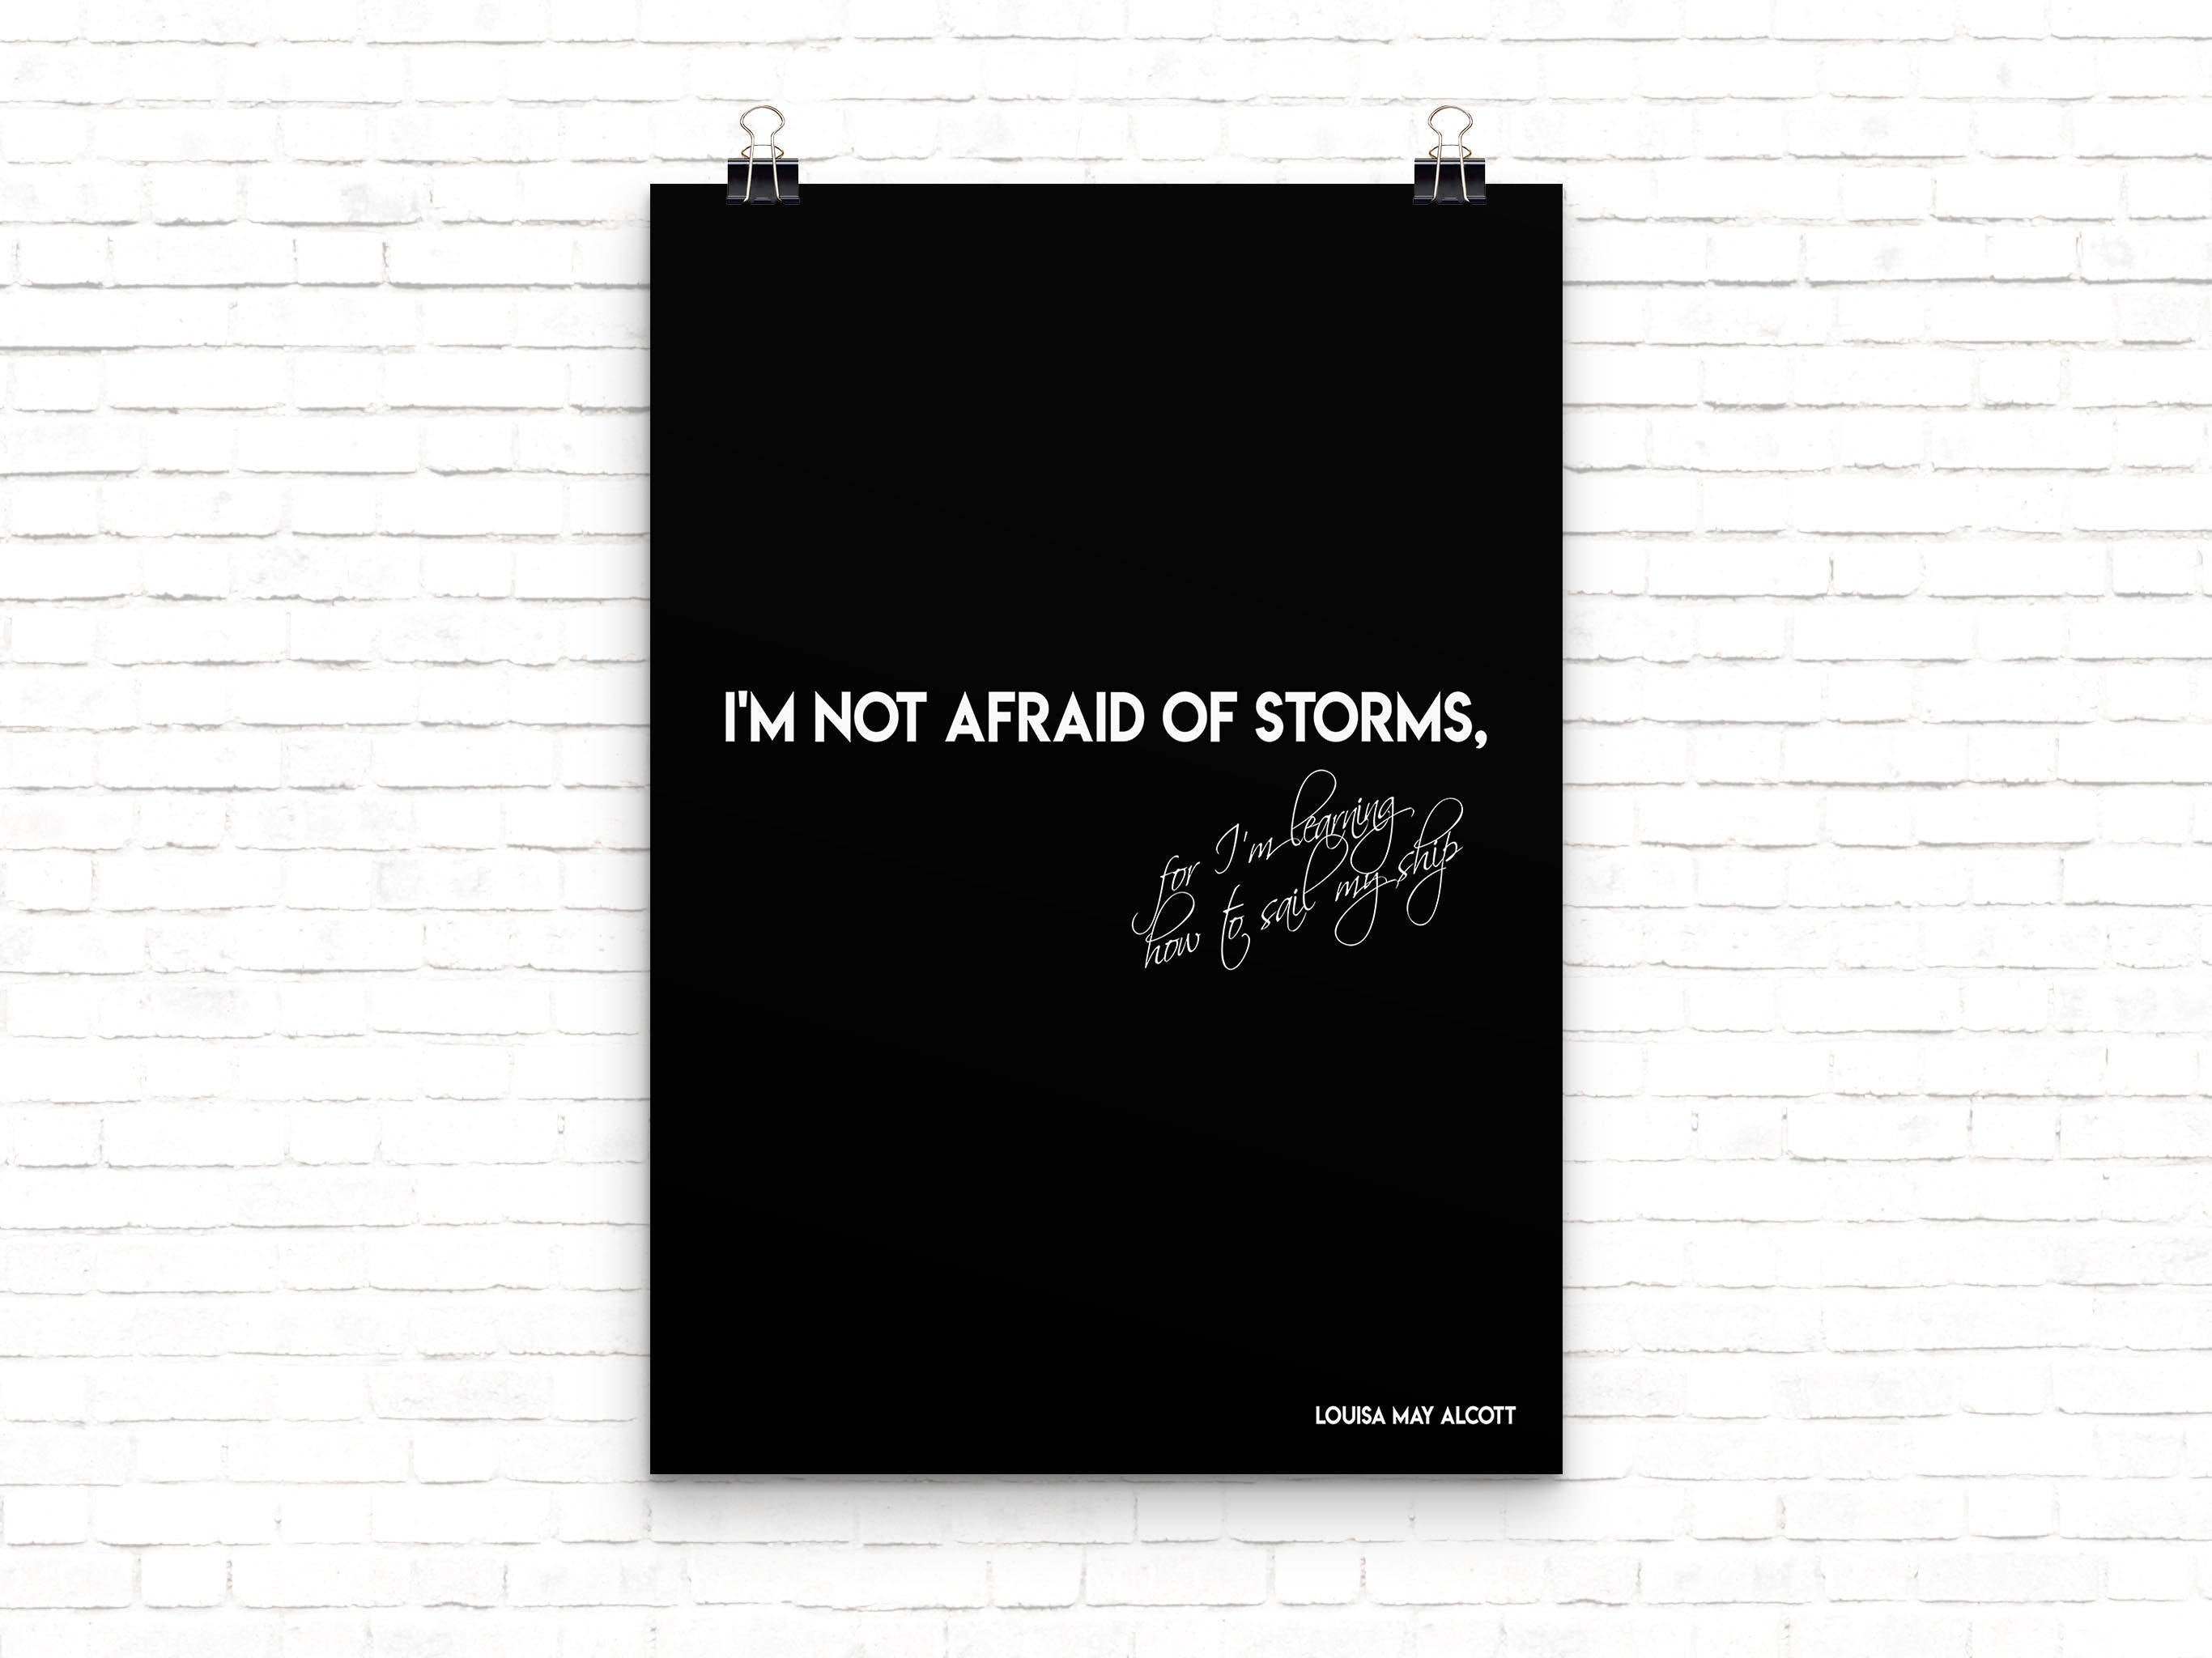 I'm Not Afraid Of Storms Louisa May Alcott Quote Print, Inspirational Poster